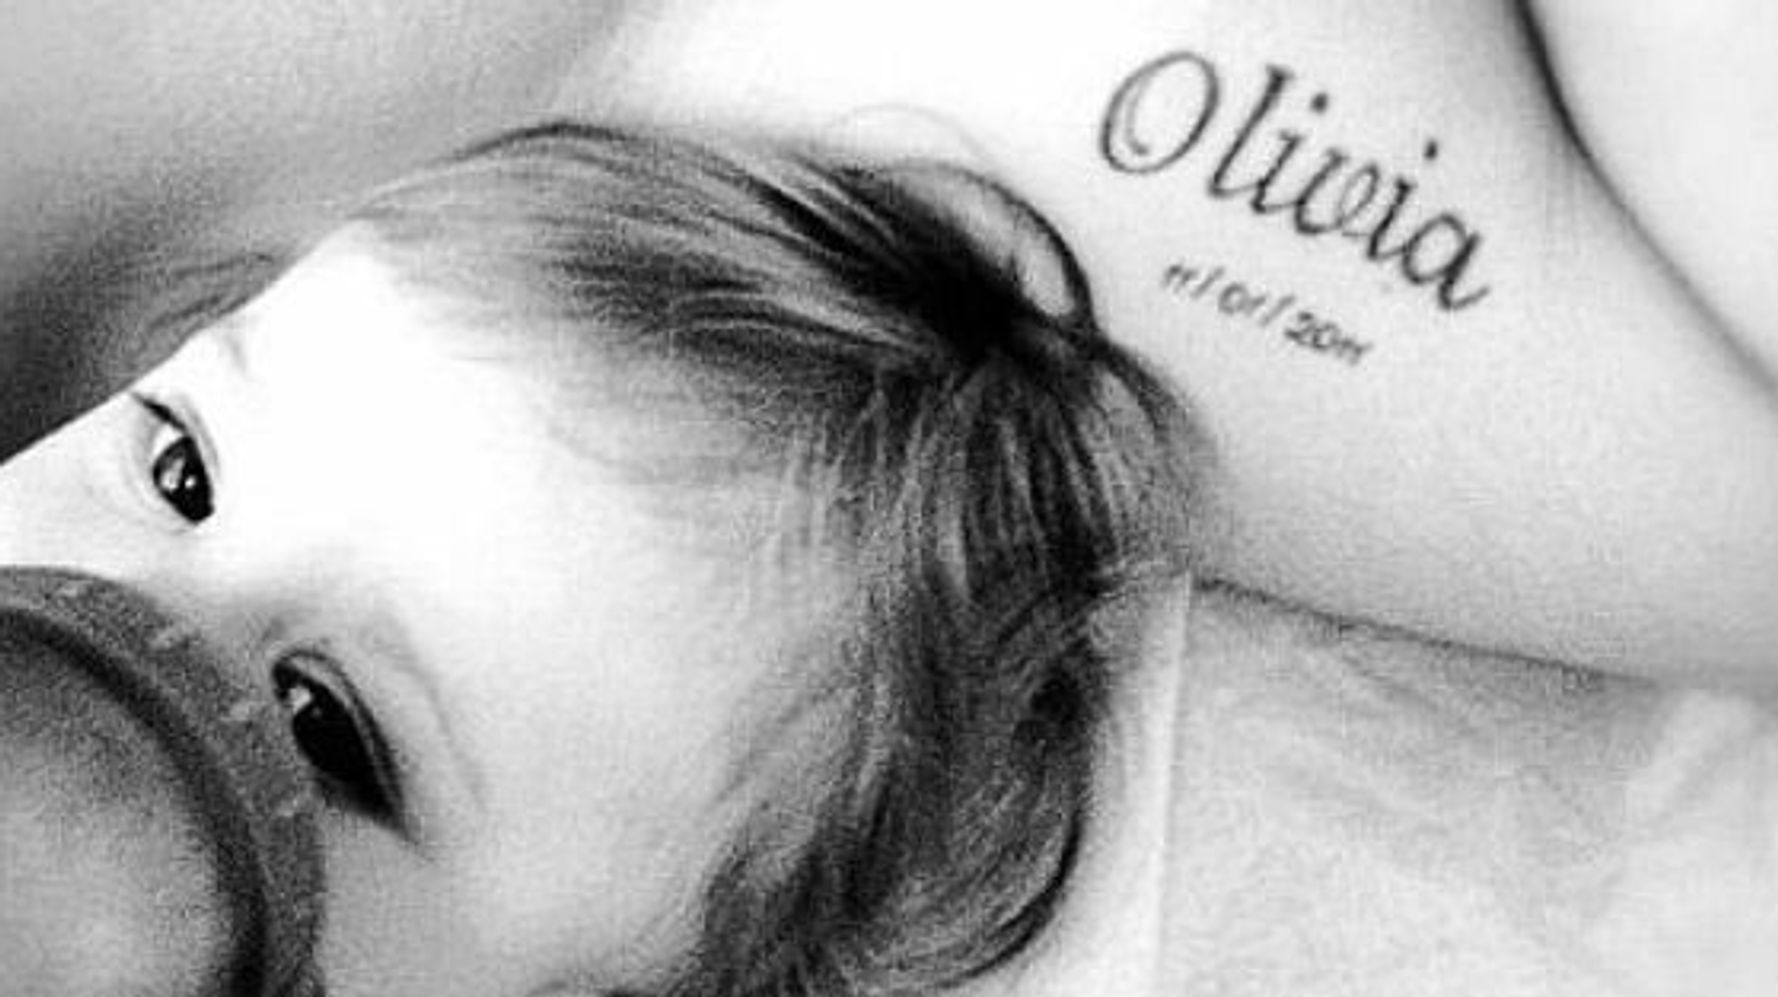 Baby Name Tattoos You'll Fall In Love With | HuffPost Parents